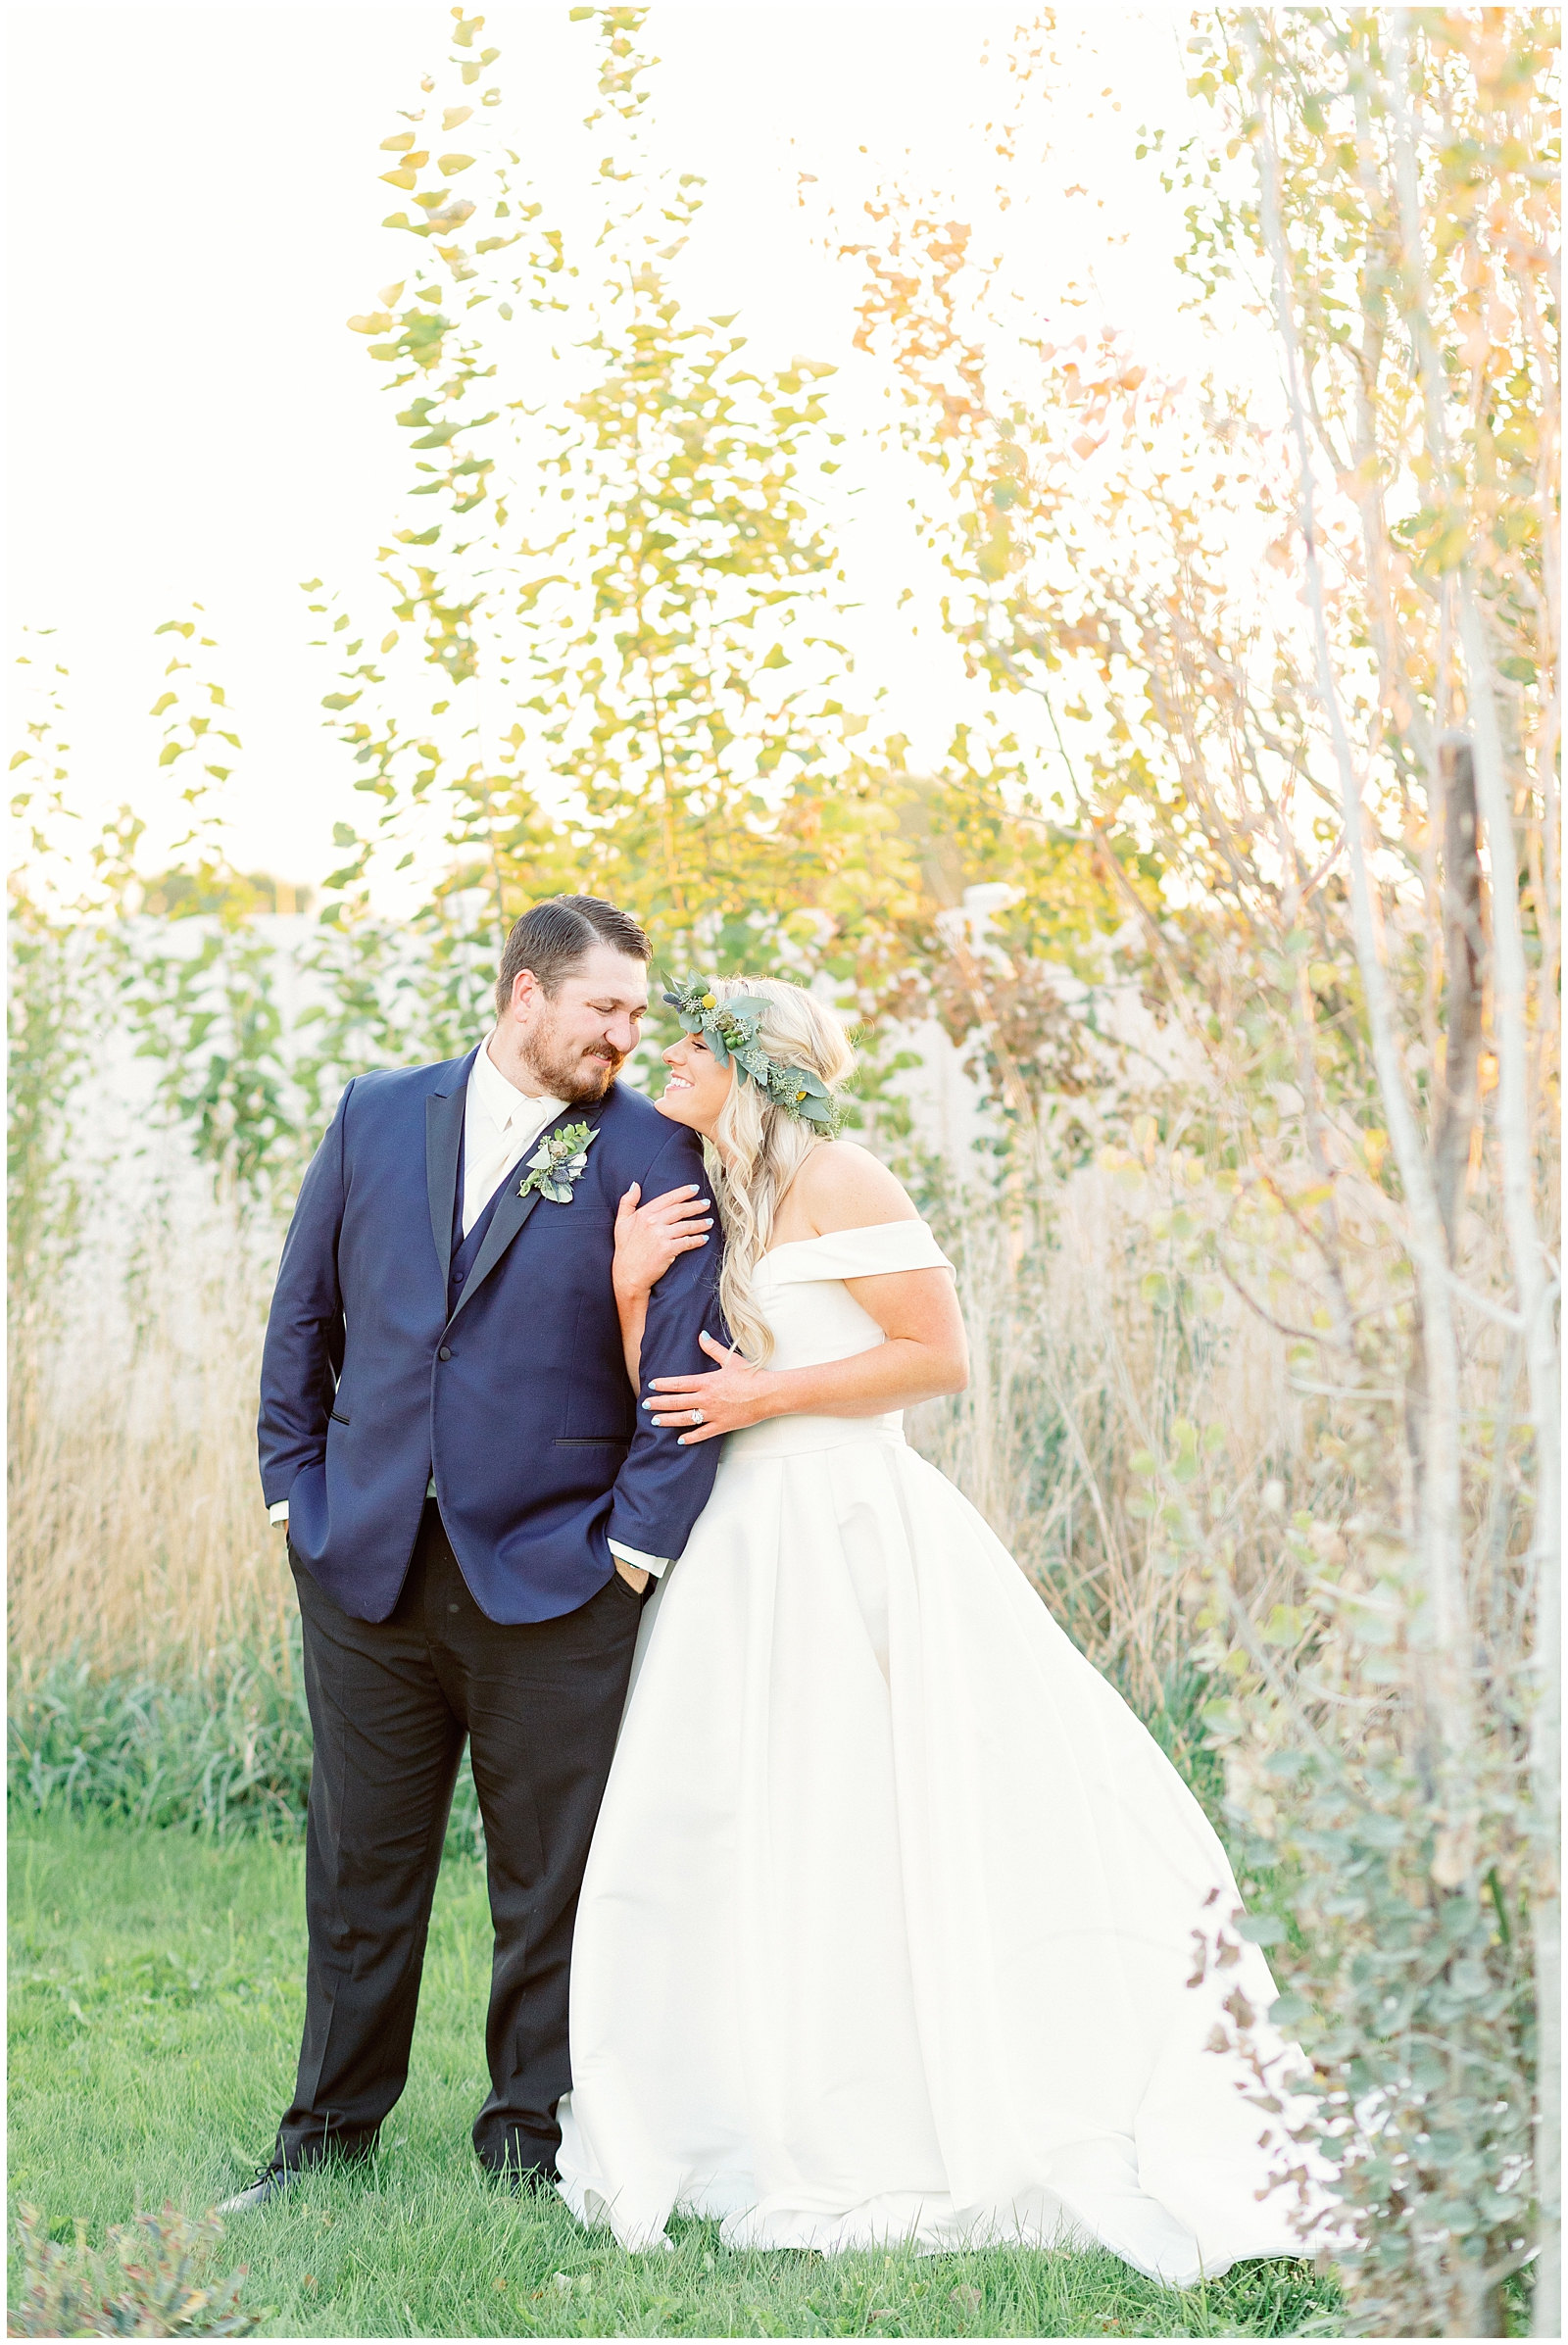 Husband and Wife golden hour portraits at White barn at Happy Valley